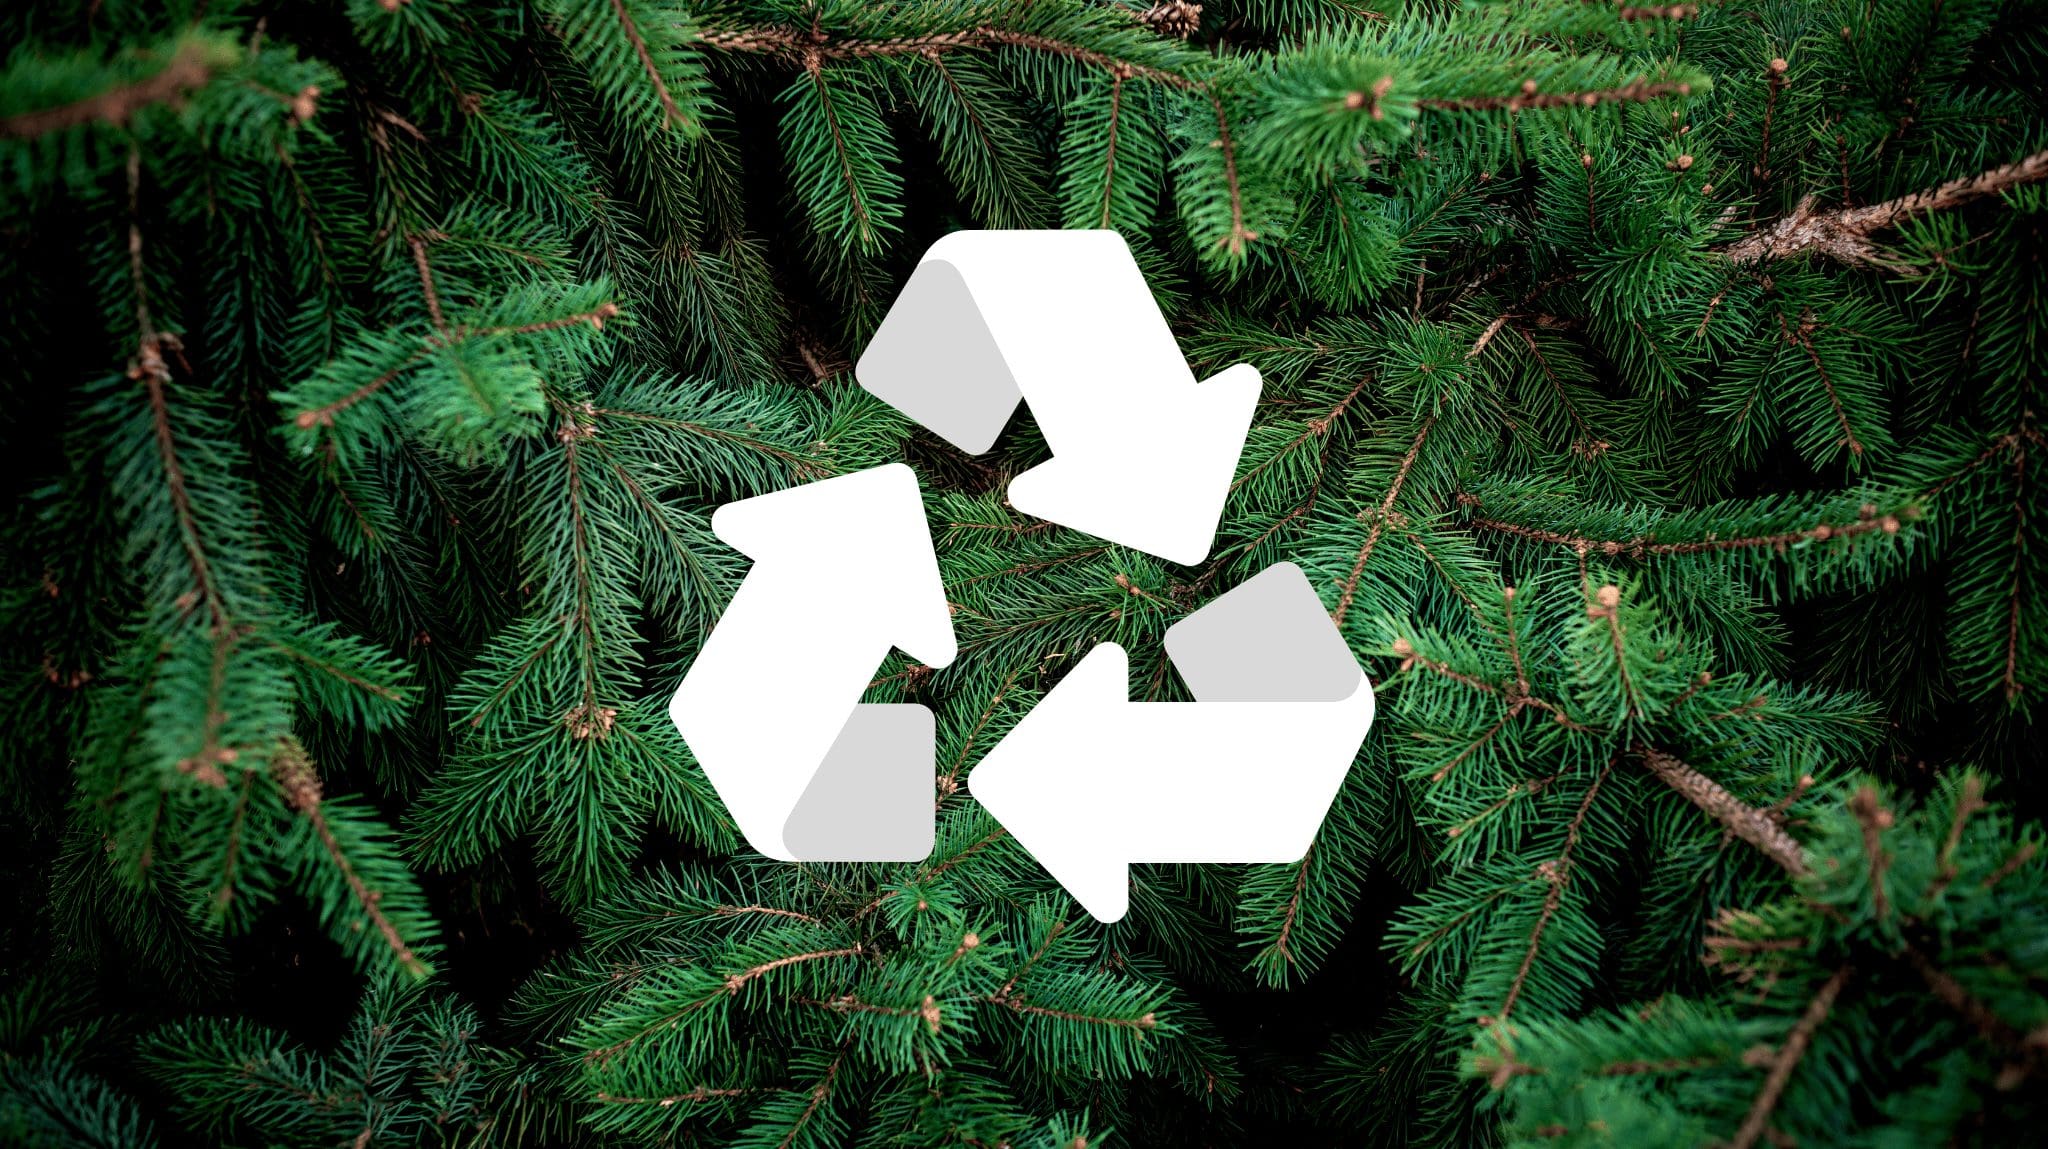 Dec. 26 is coming. Here's how to recycle your Christmas tree